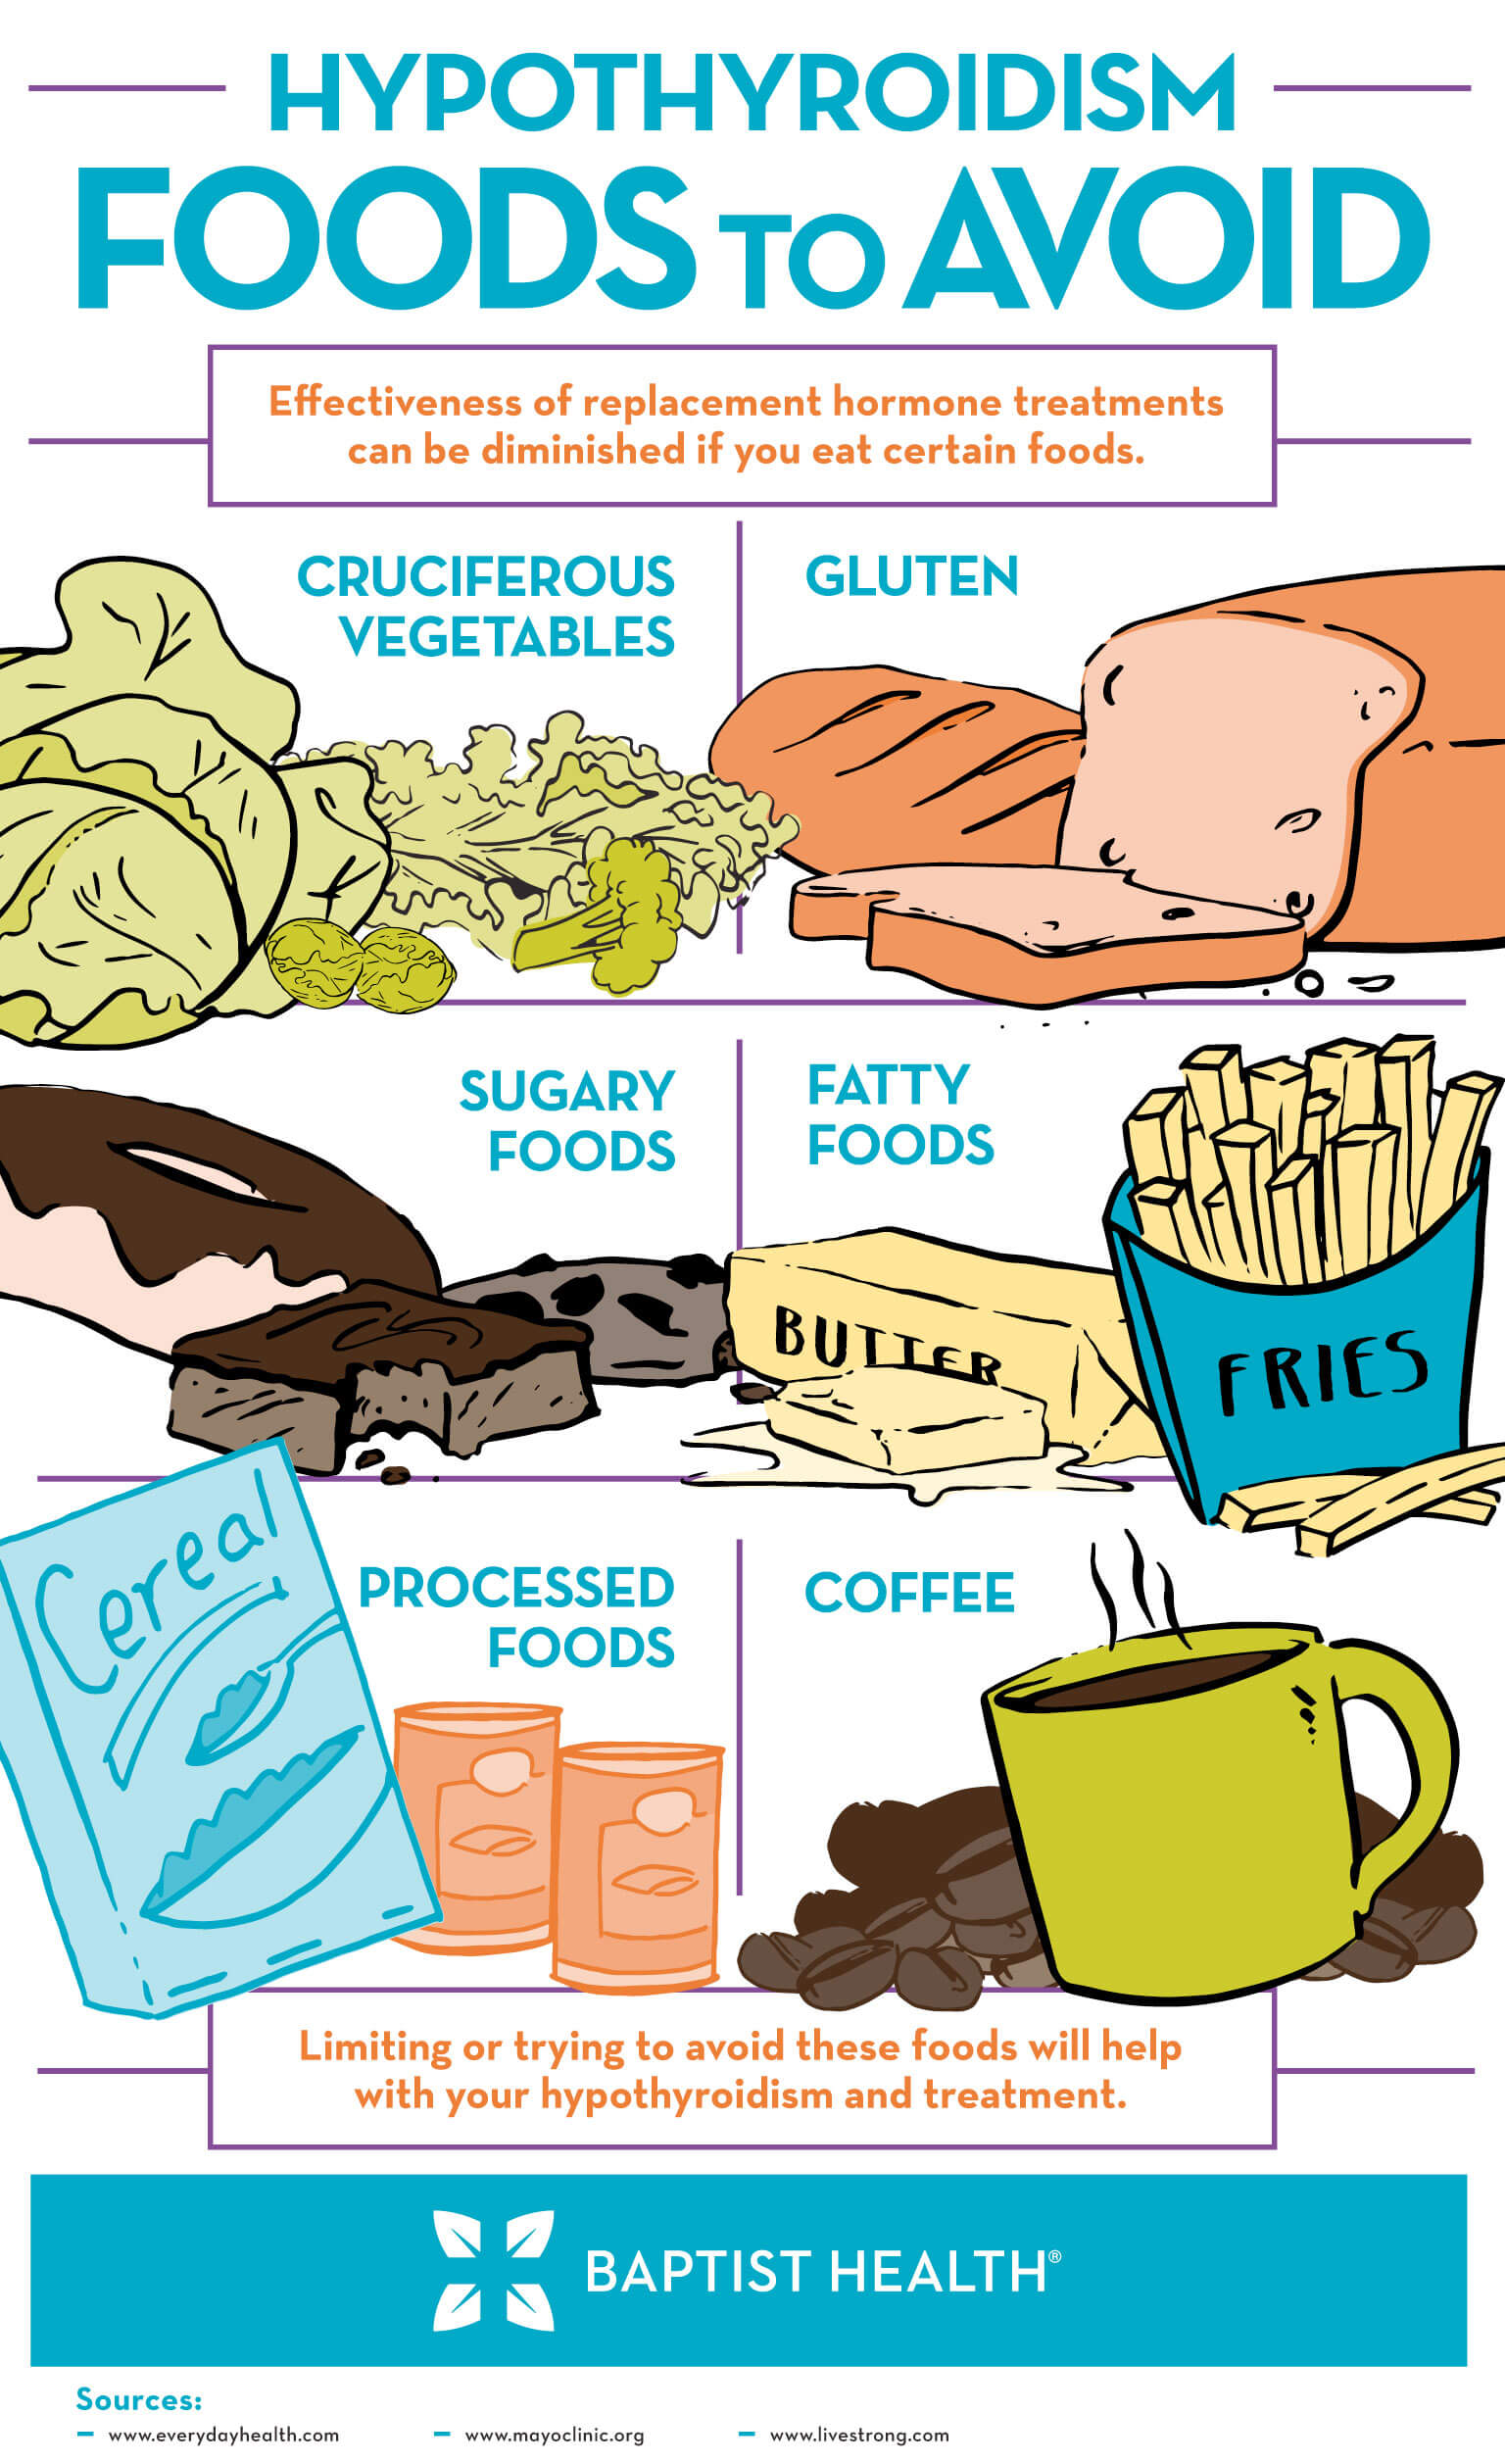 infographic-foods-to-avoid-hypothyroidism